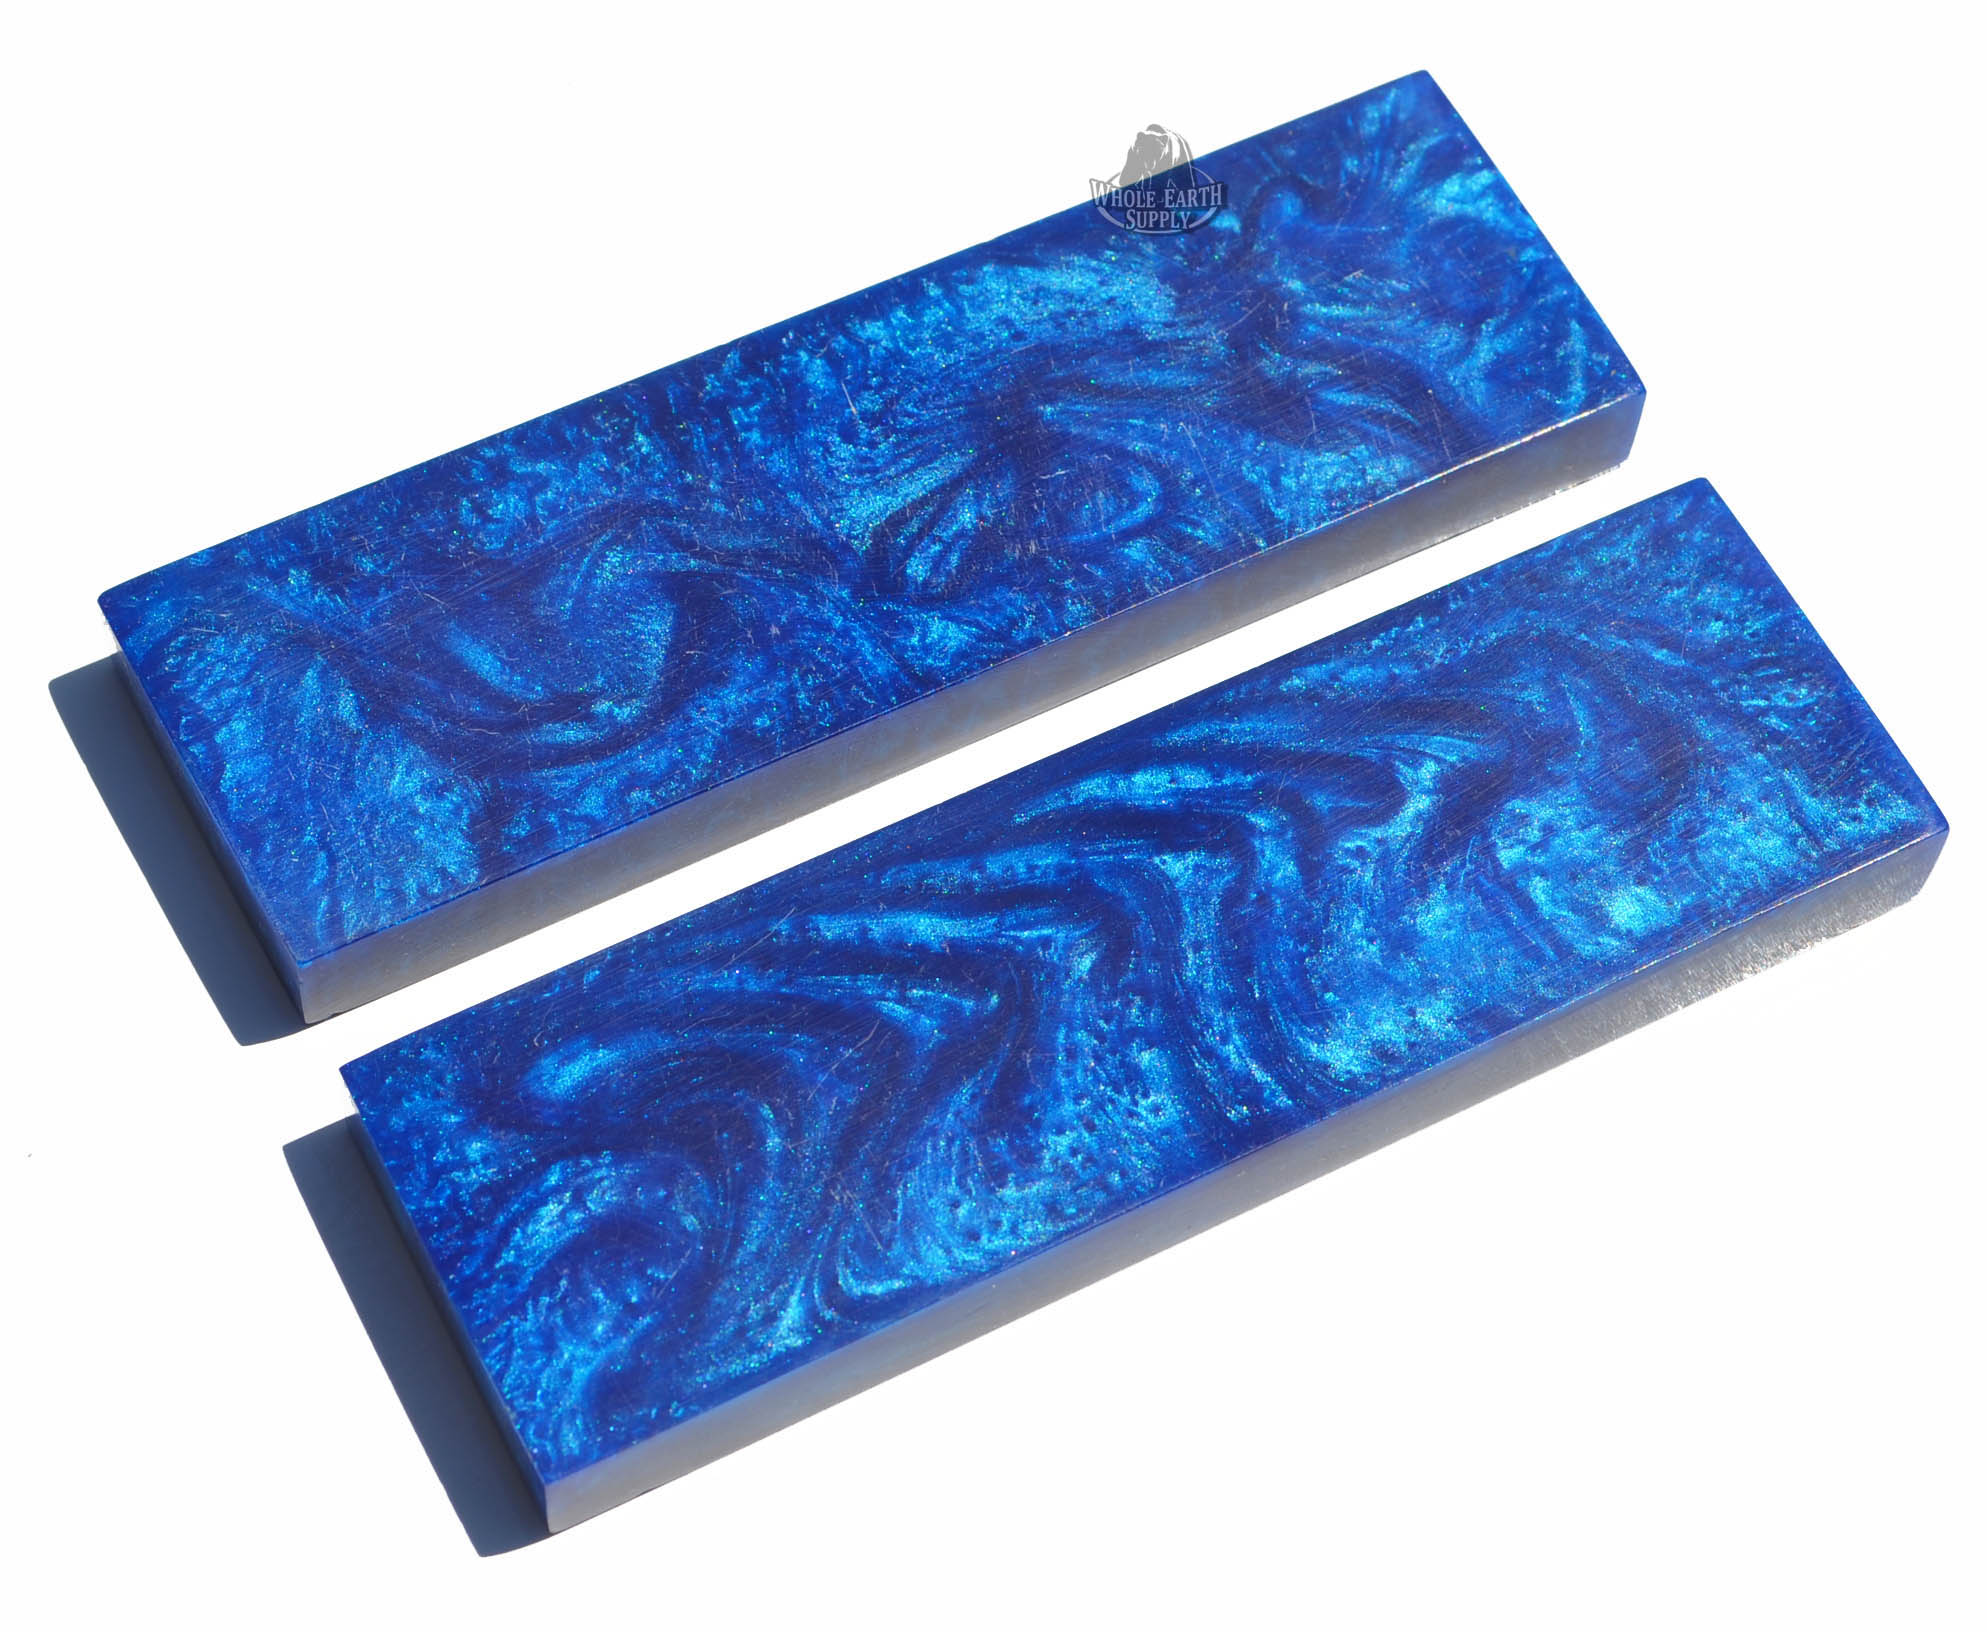 5 inch Blue Pearl Pearlescent Acrylic Handle Material Scales Set Pair Handles Materials Knife Making Grips Blanks Blades Knives